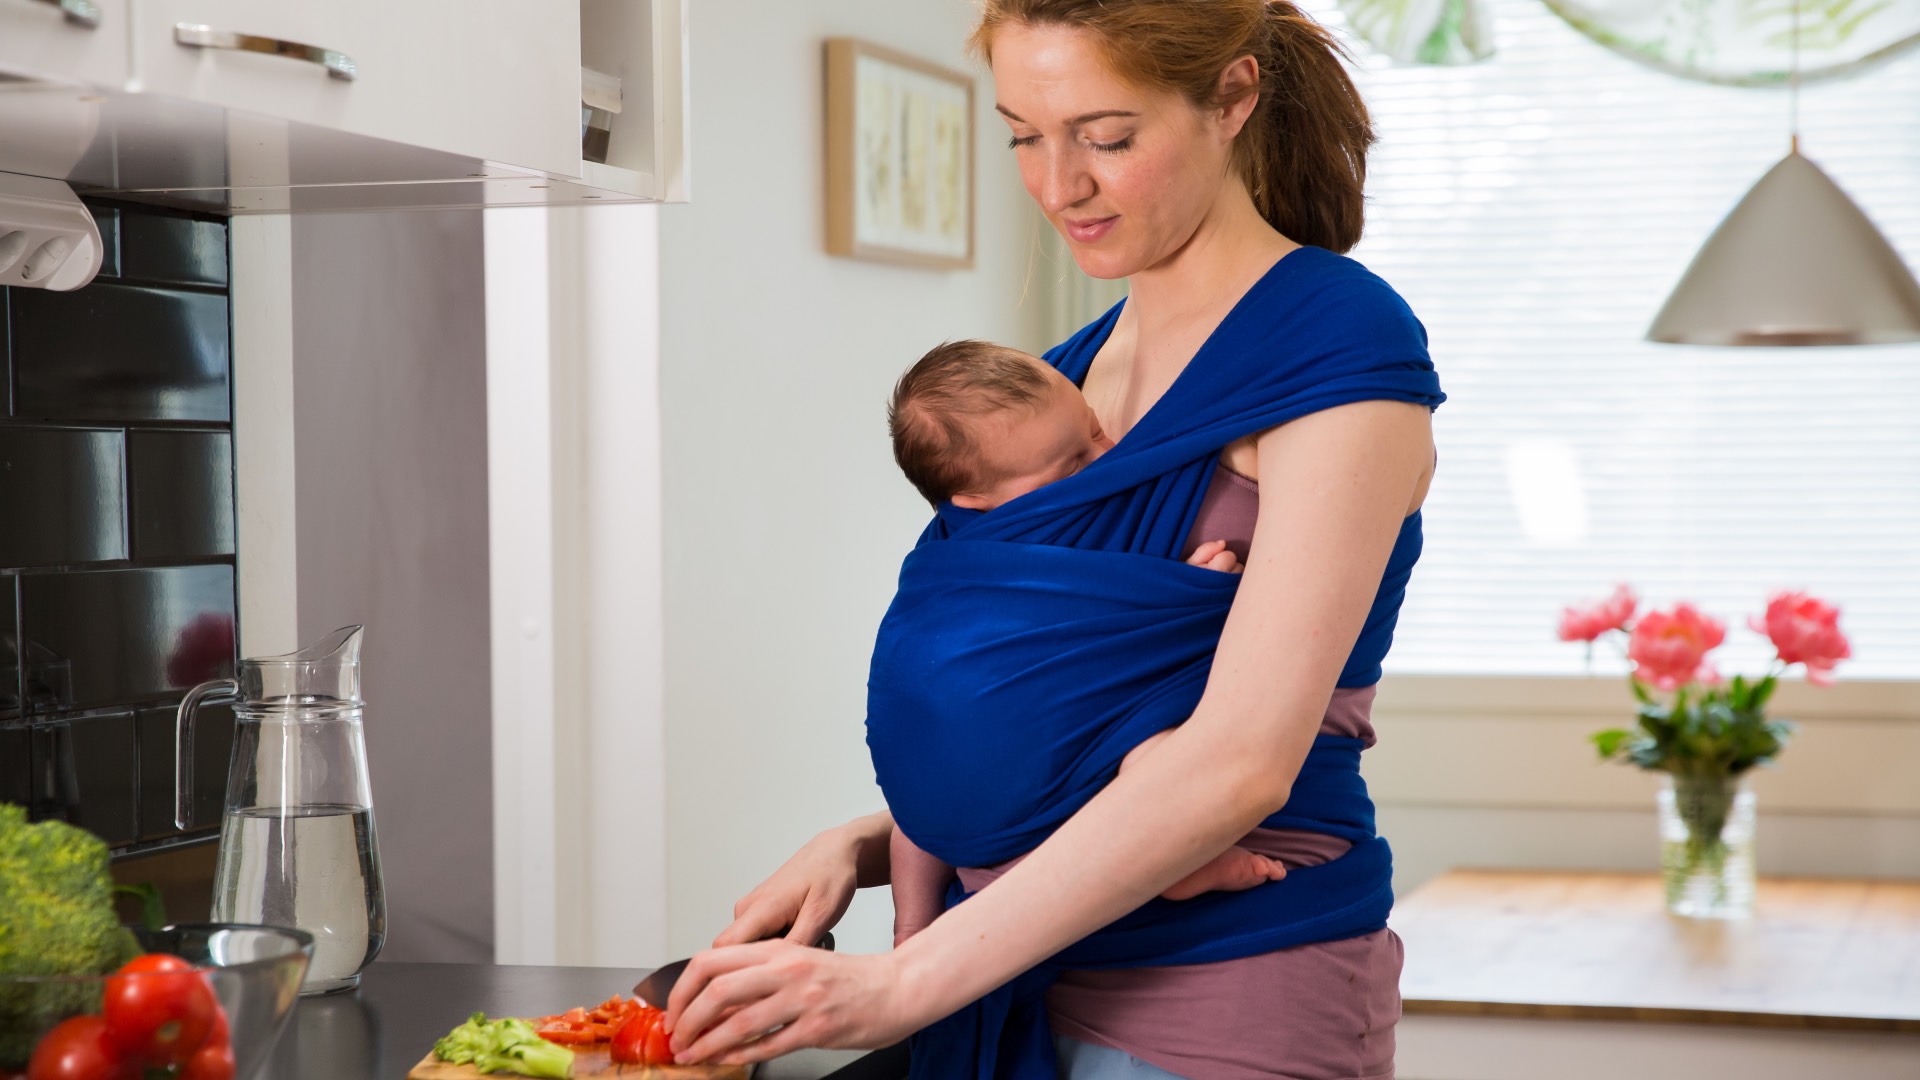 breast feeding and chopping vegetables